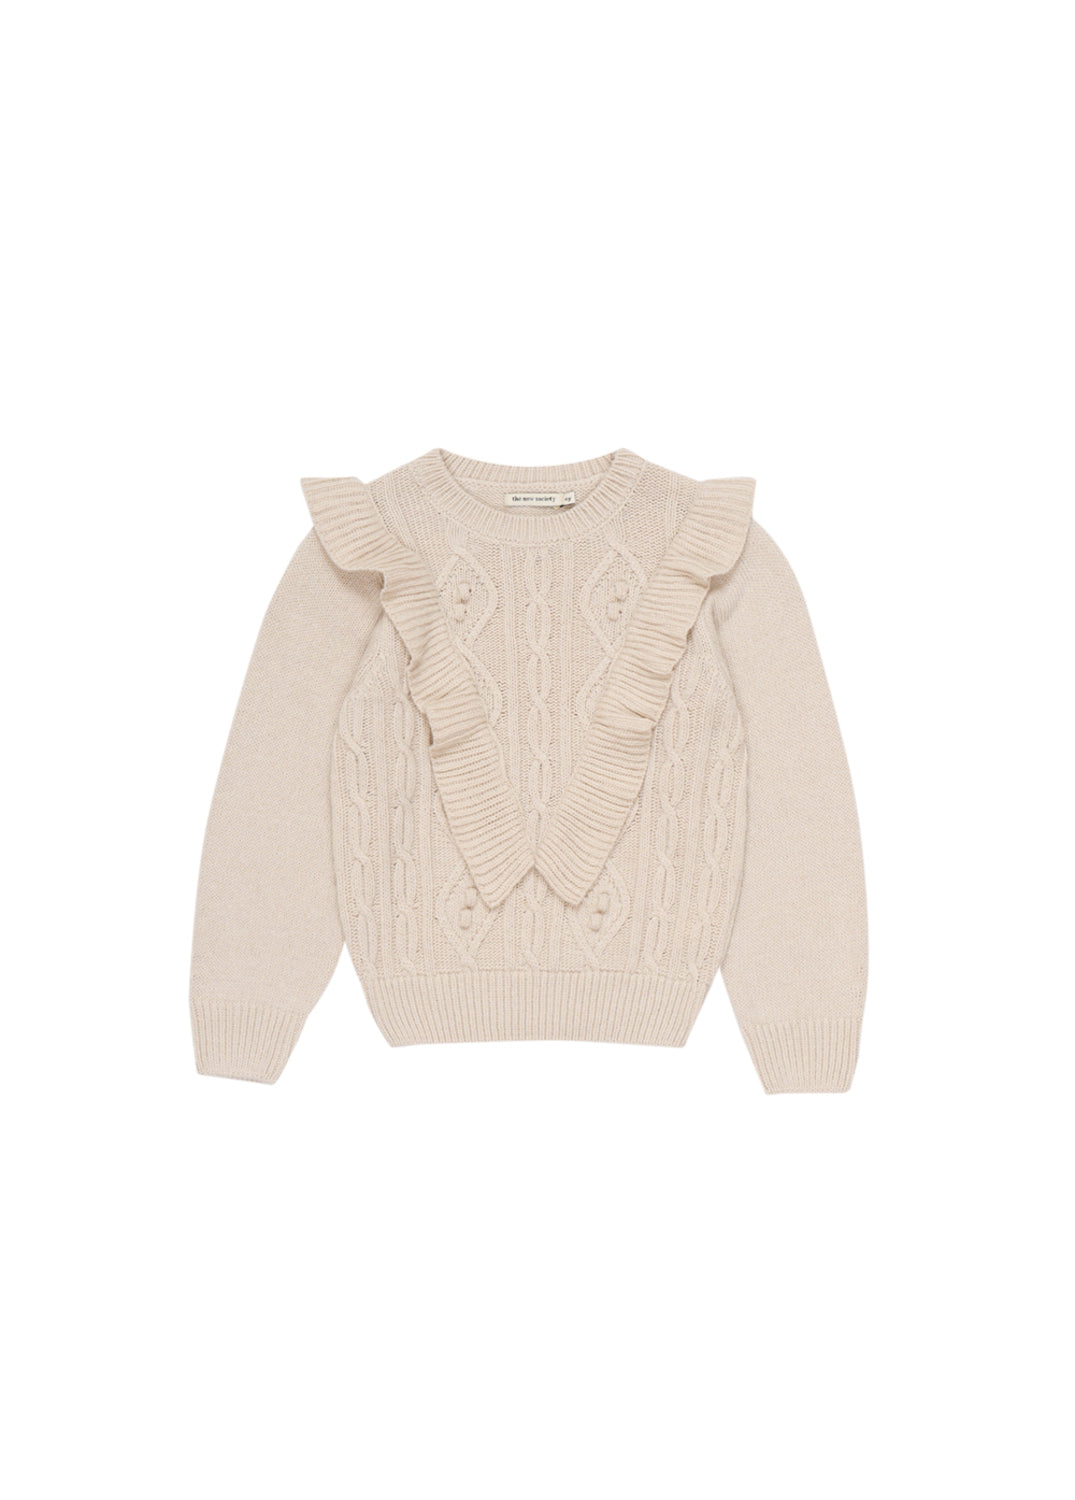 The New Society Lucia Sweater - Sand